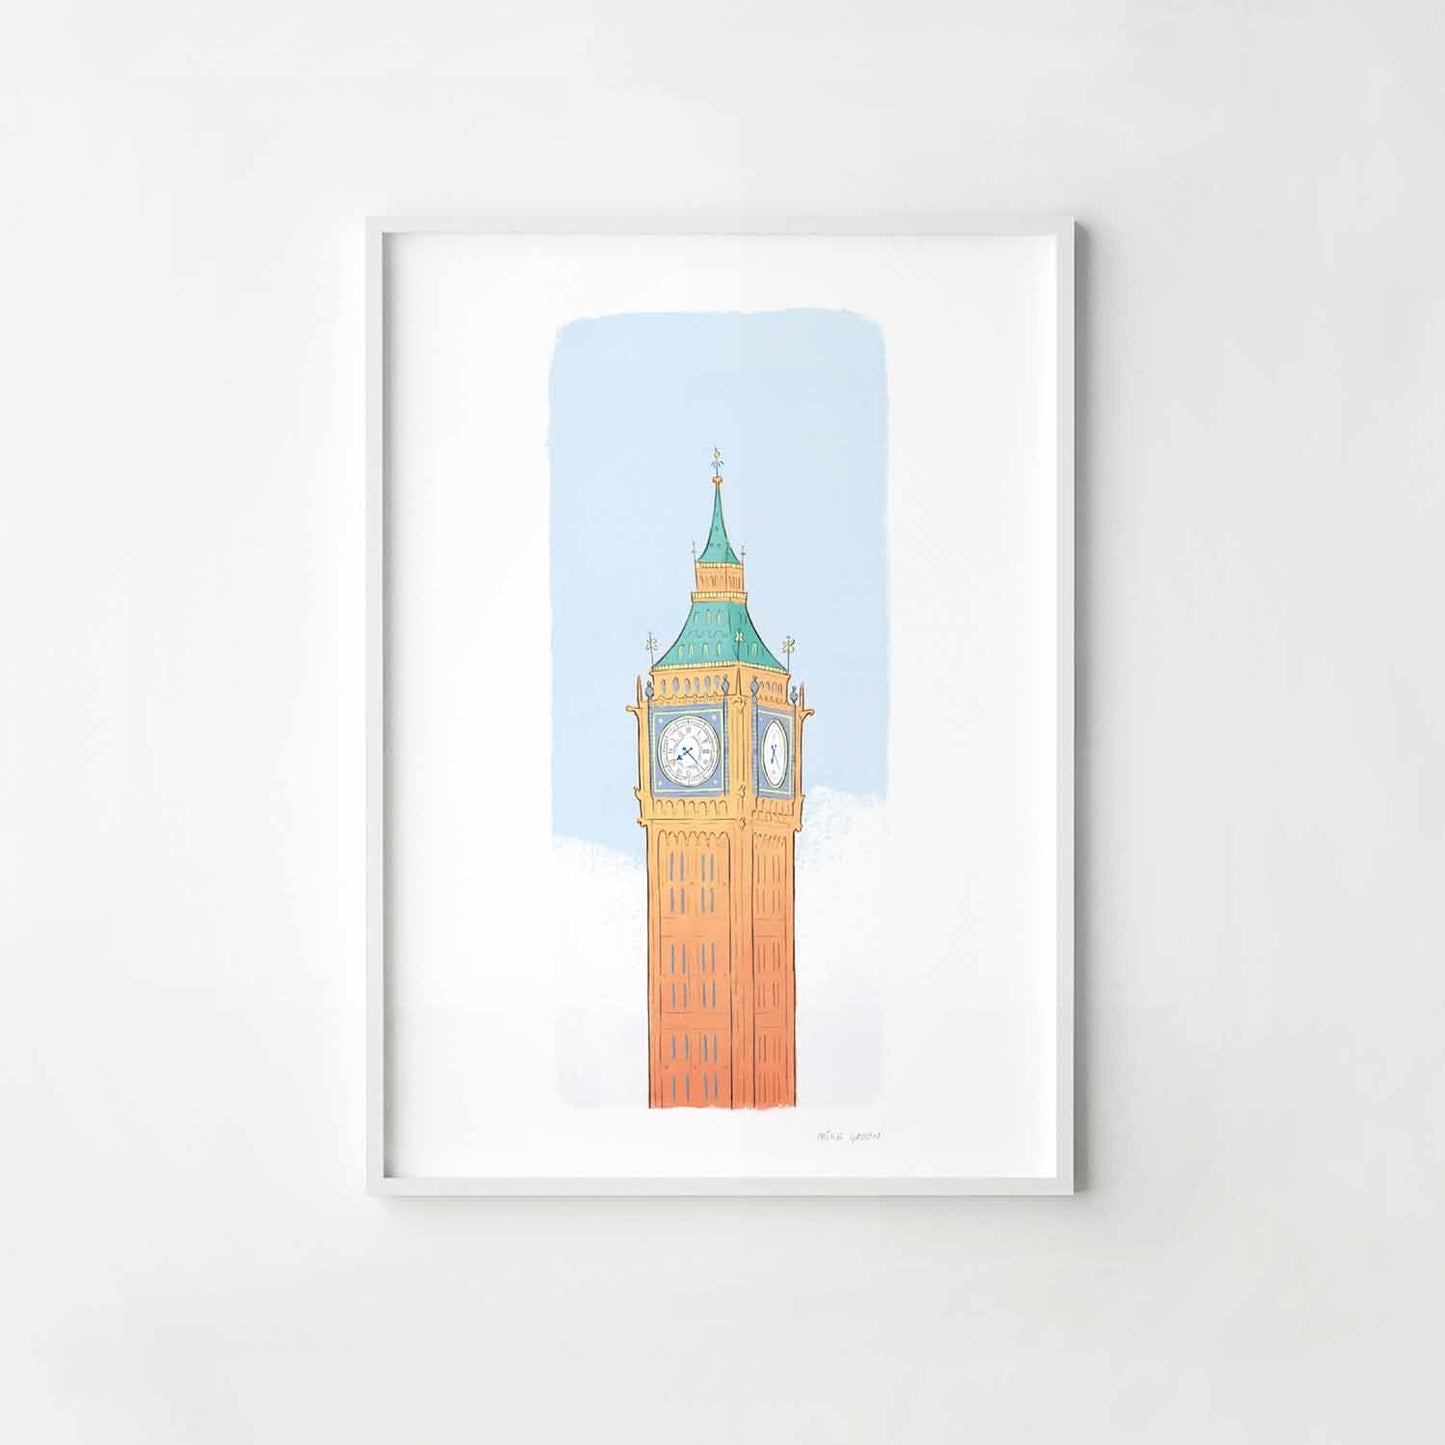 A print of London's Big Ben beautifully illustrated by Mike Green.